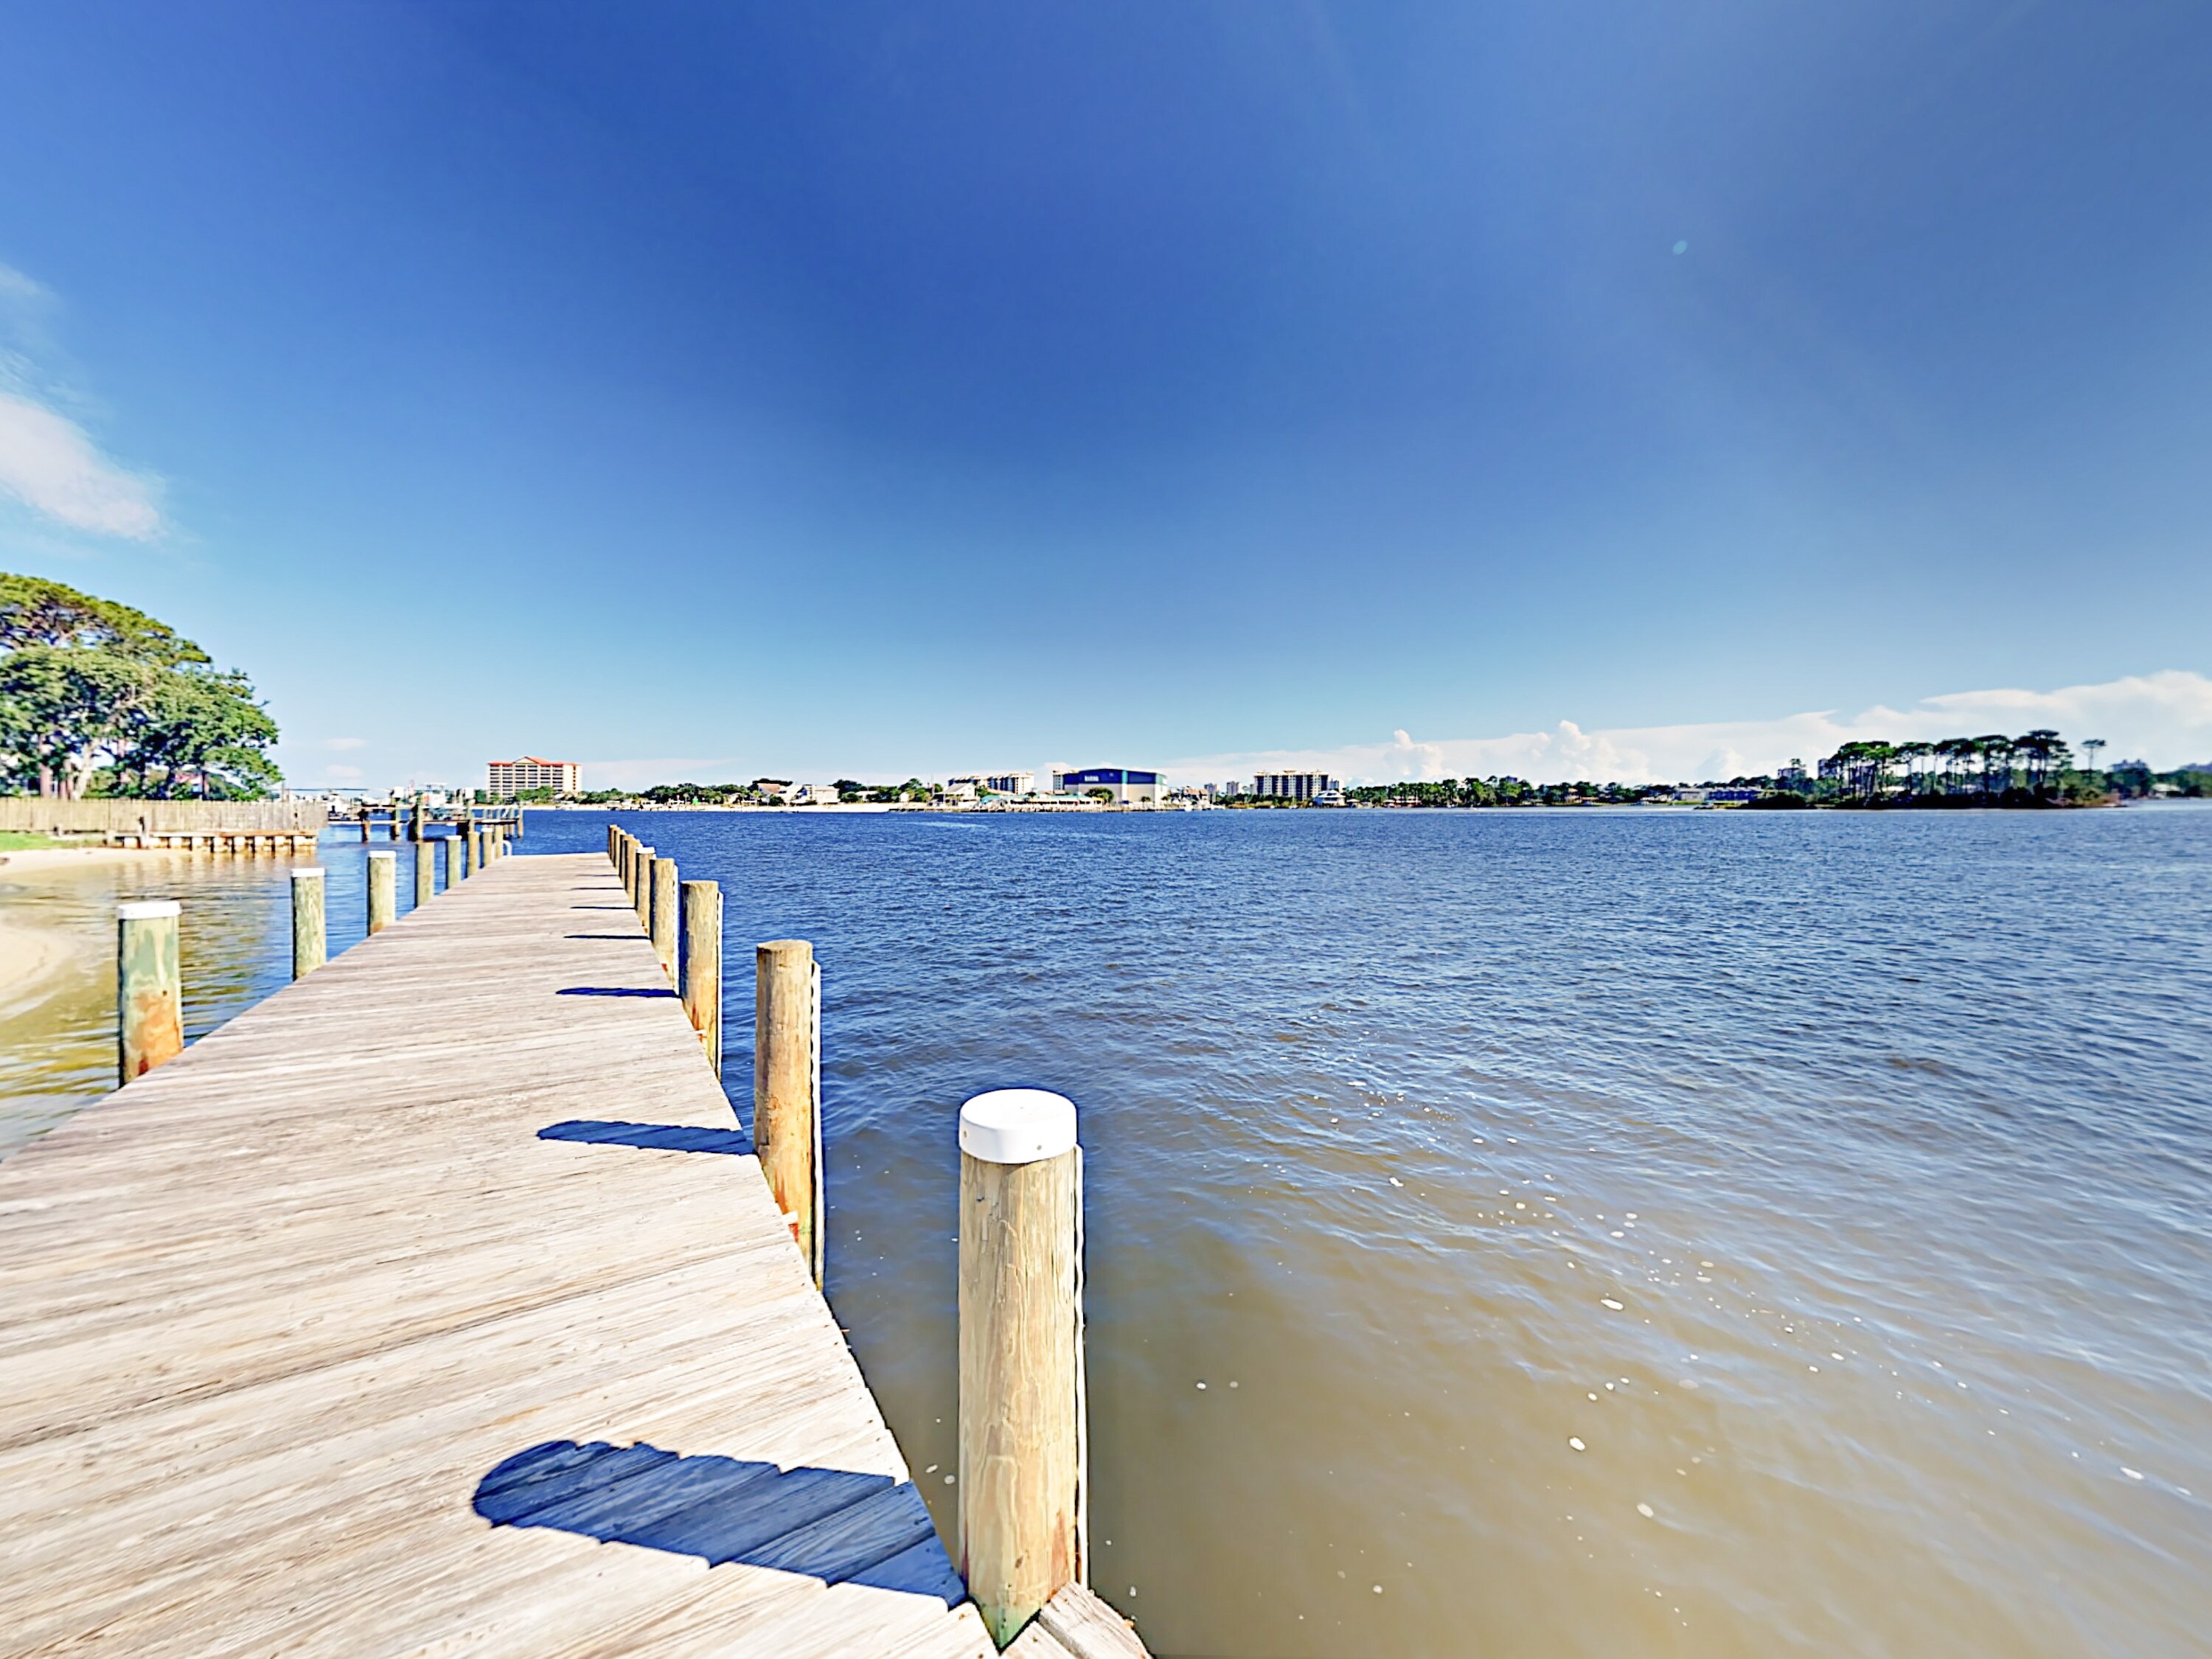 Launch a kayak at the nearby intracoastal access point.